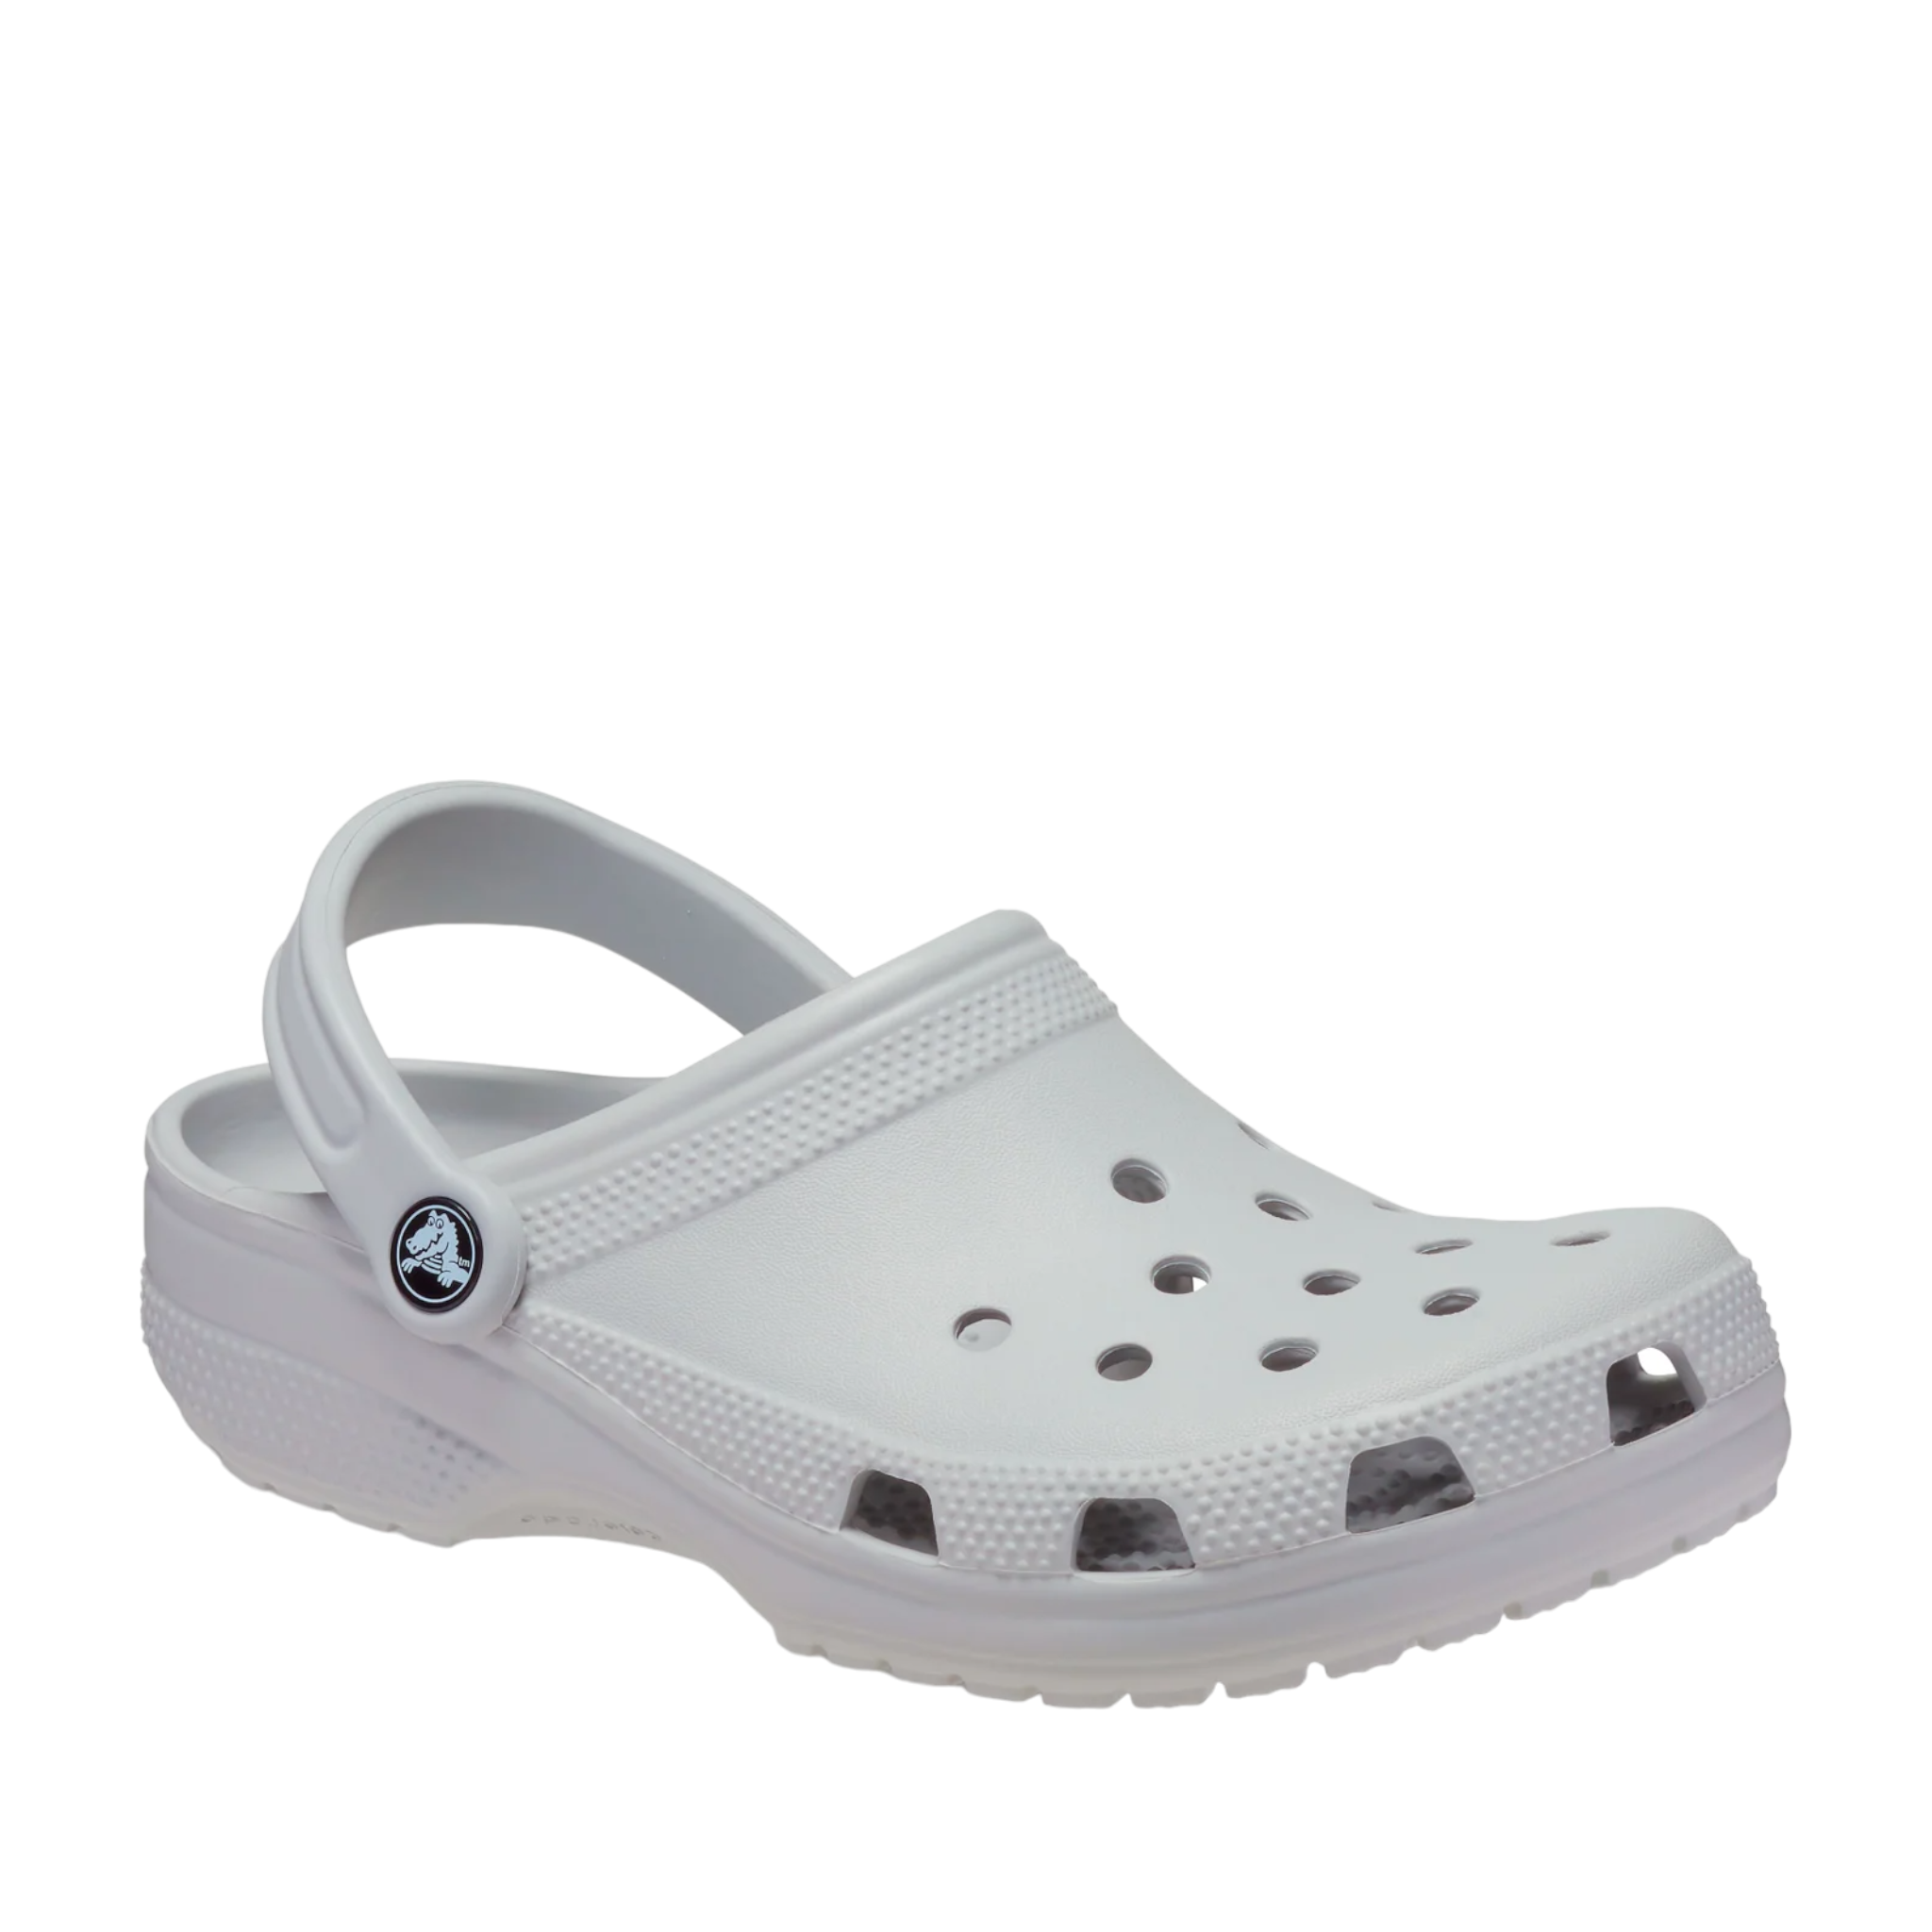 Crocs Classic Clogs online and instore with shoe&amp;me Mount Maunganui. Shop Atmosphere Clogs